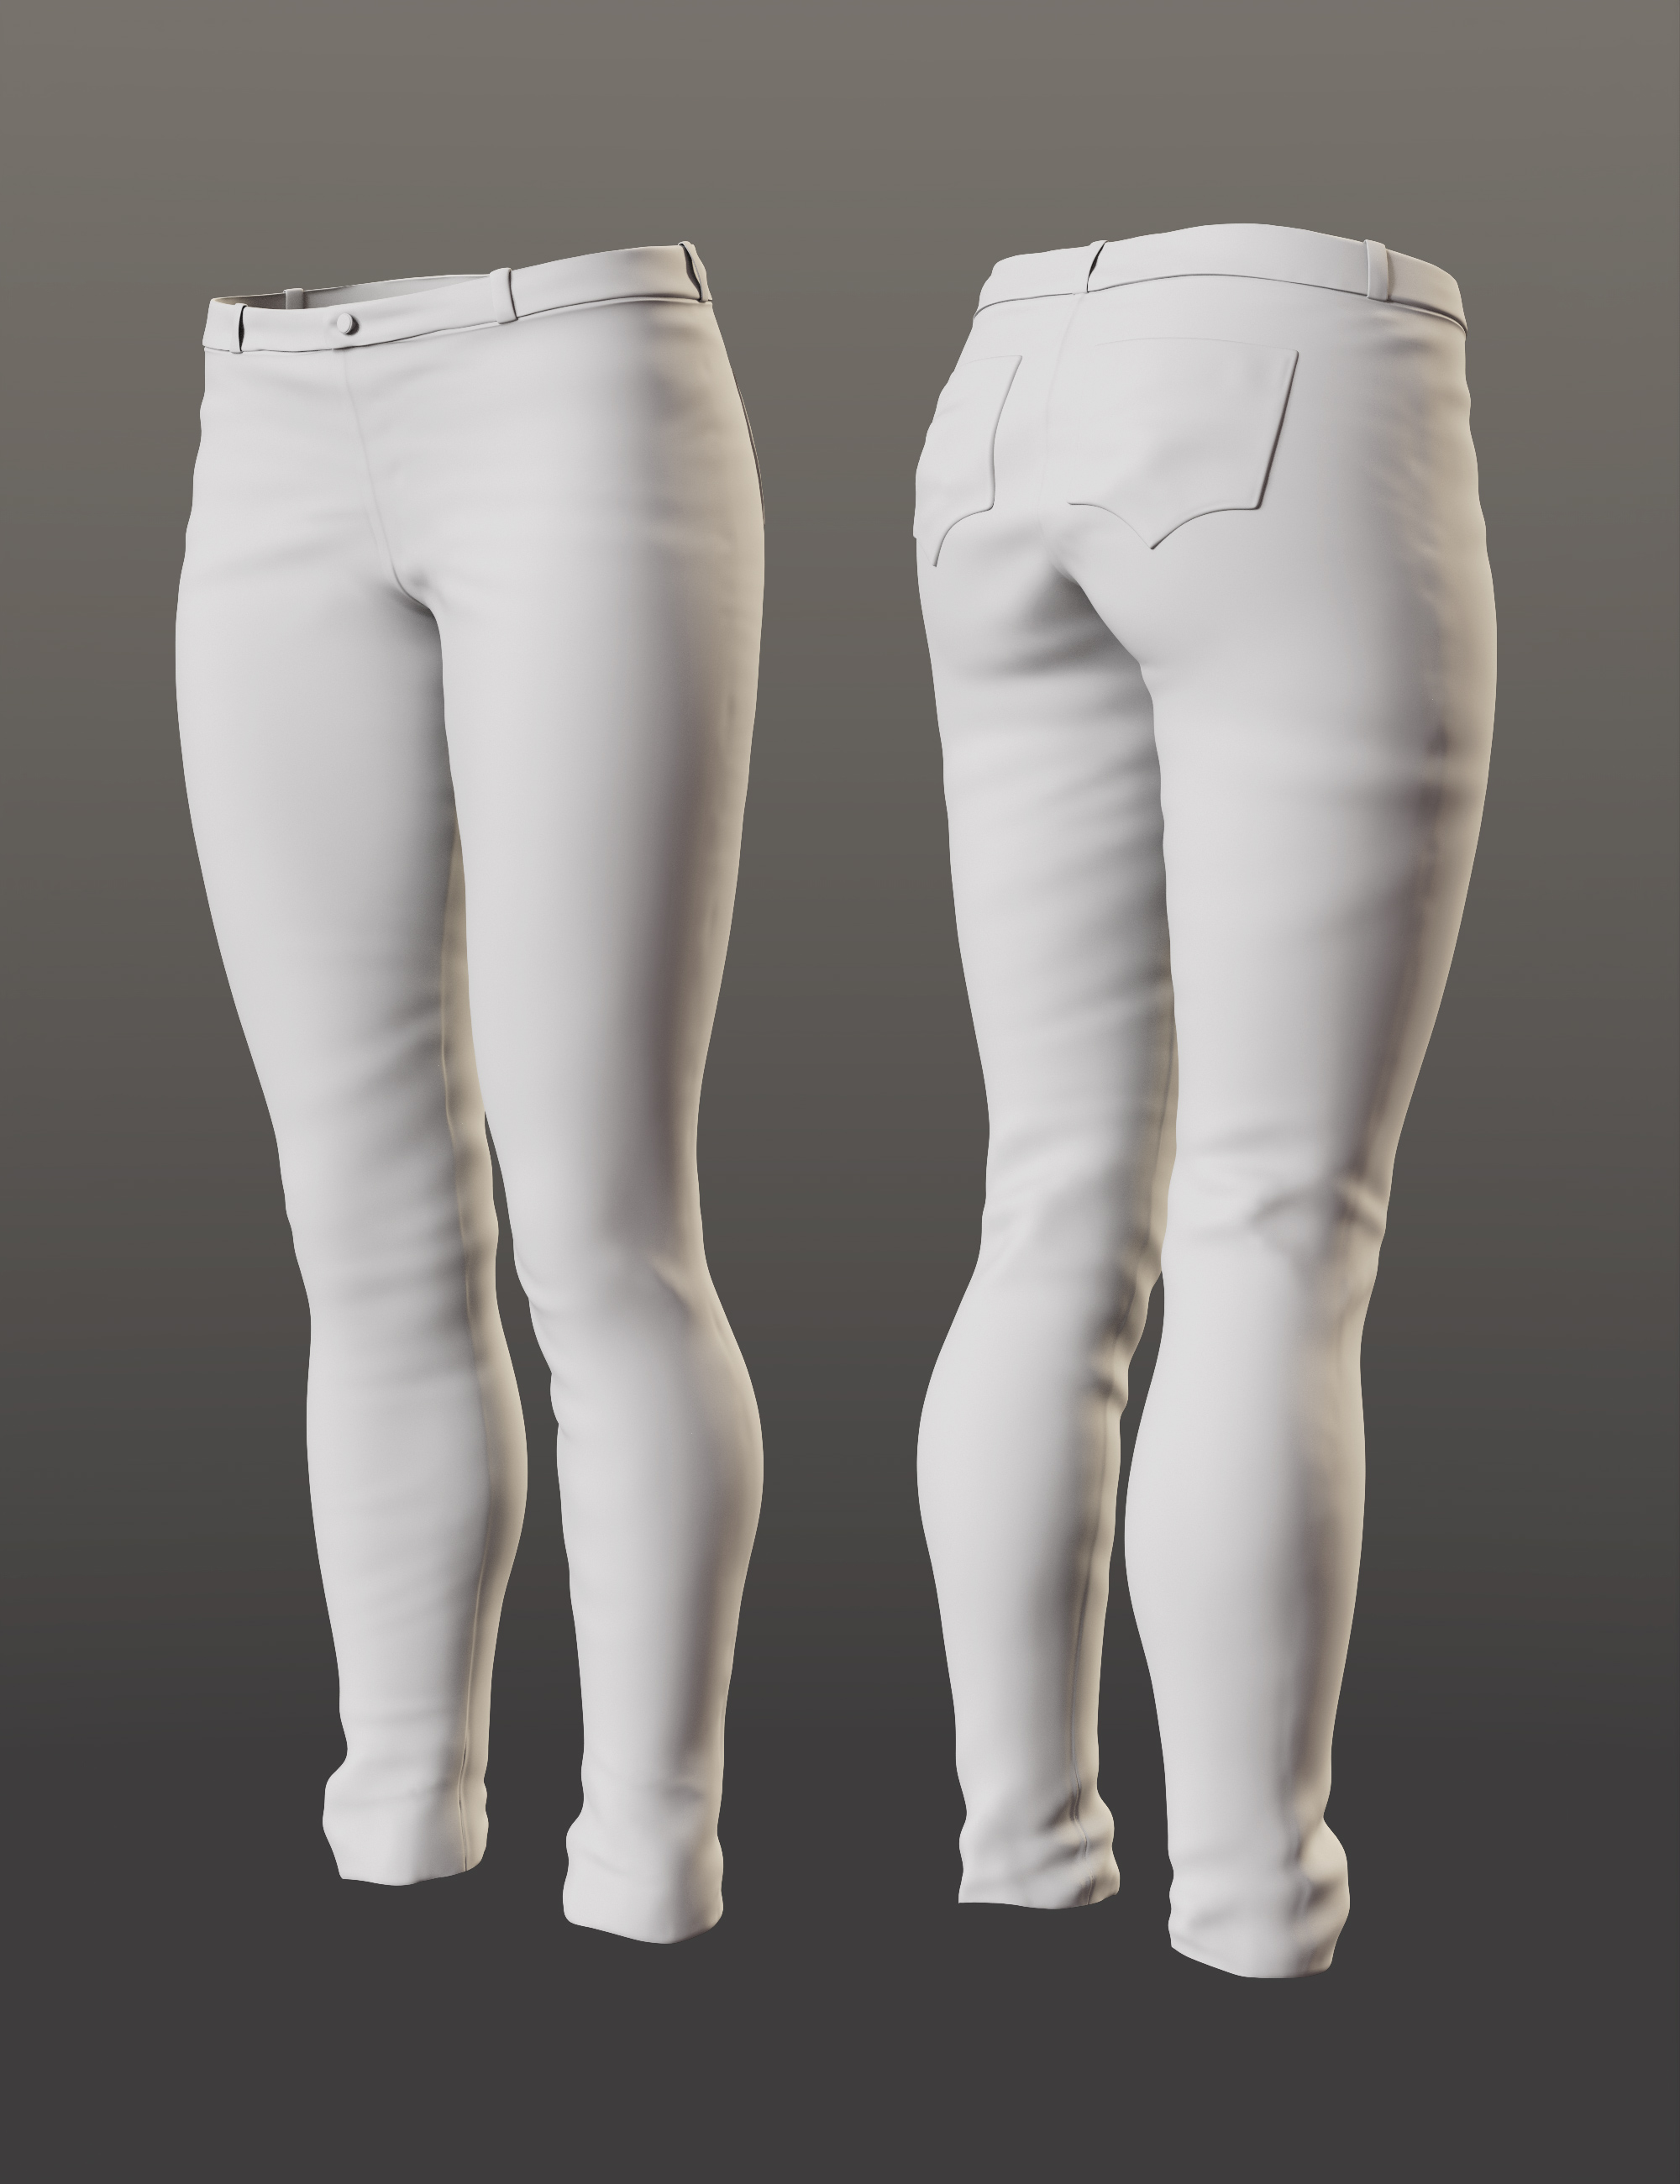 Shadow Realm Pants for Genesis 8 and 8.1 Females by: Barbara BrundonUmblefugly, 3D Models by Daz 3D